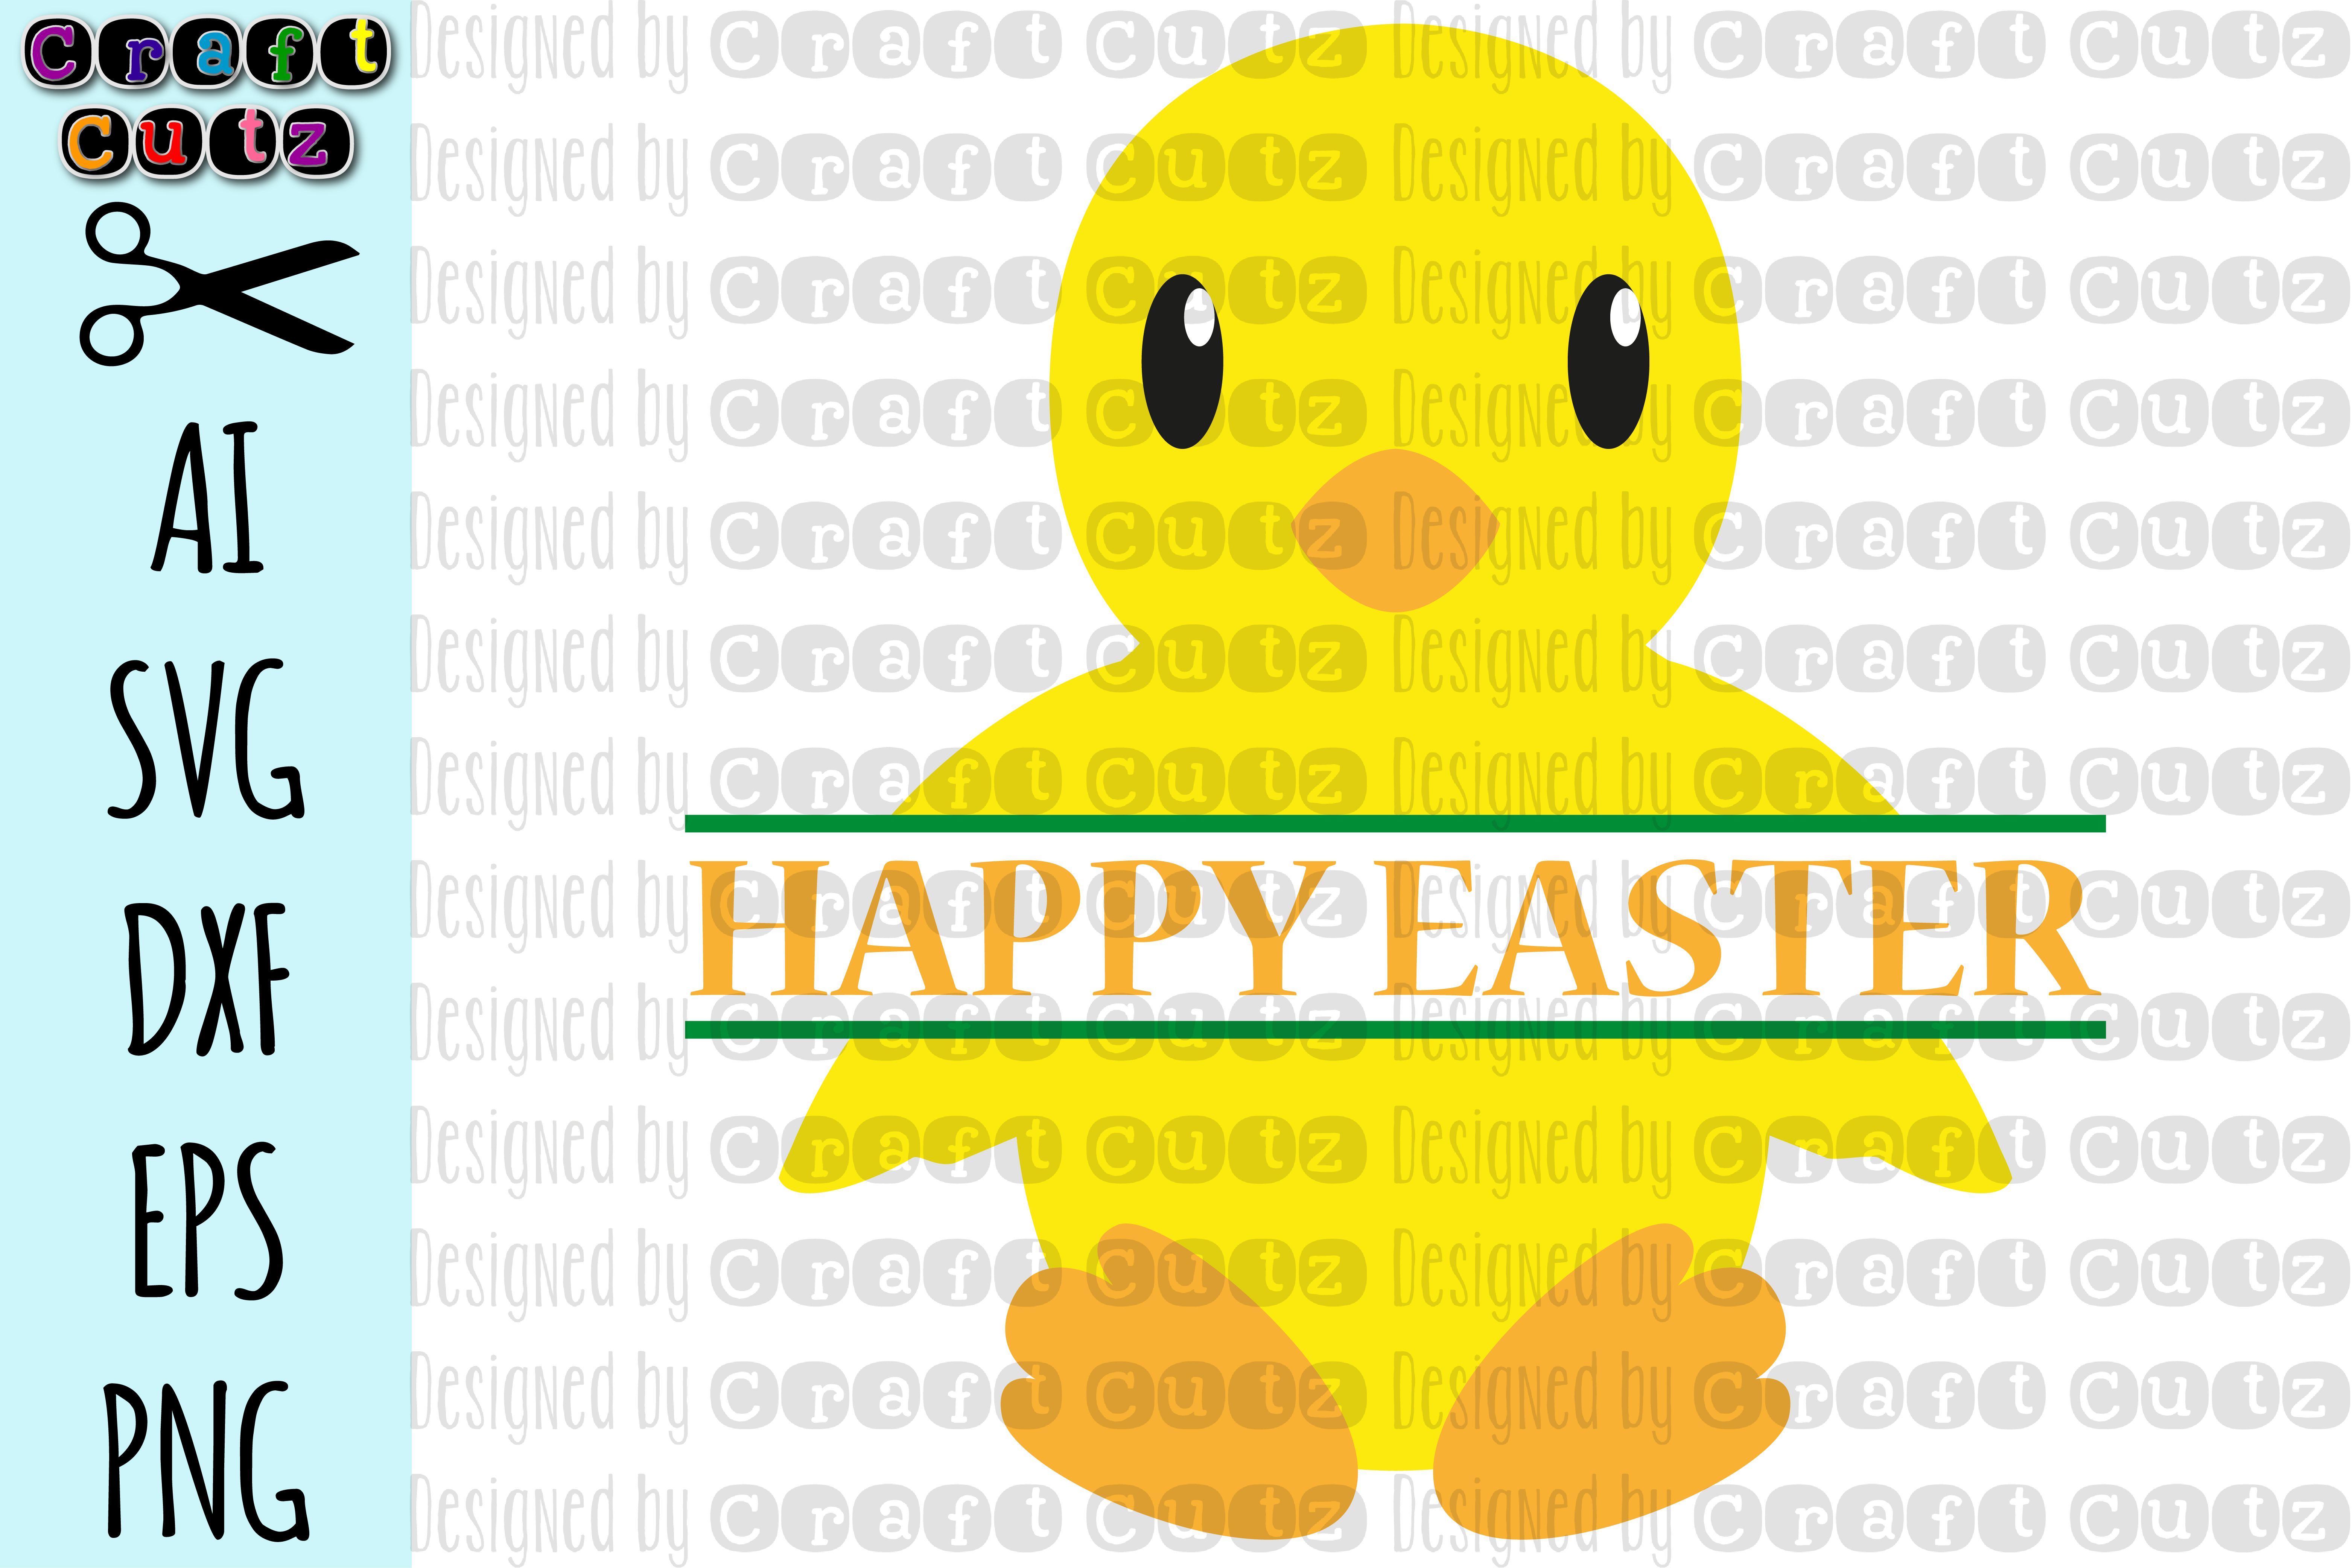 Download Baby Chicks Monogram, Happy Easter, AI, SVG, DXF, EPS, and ...